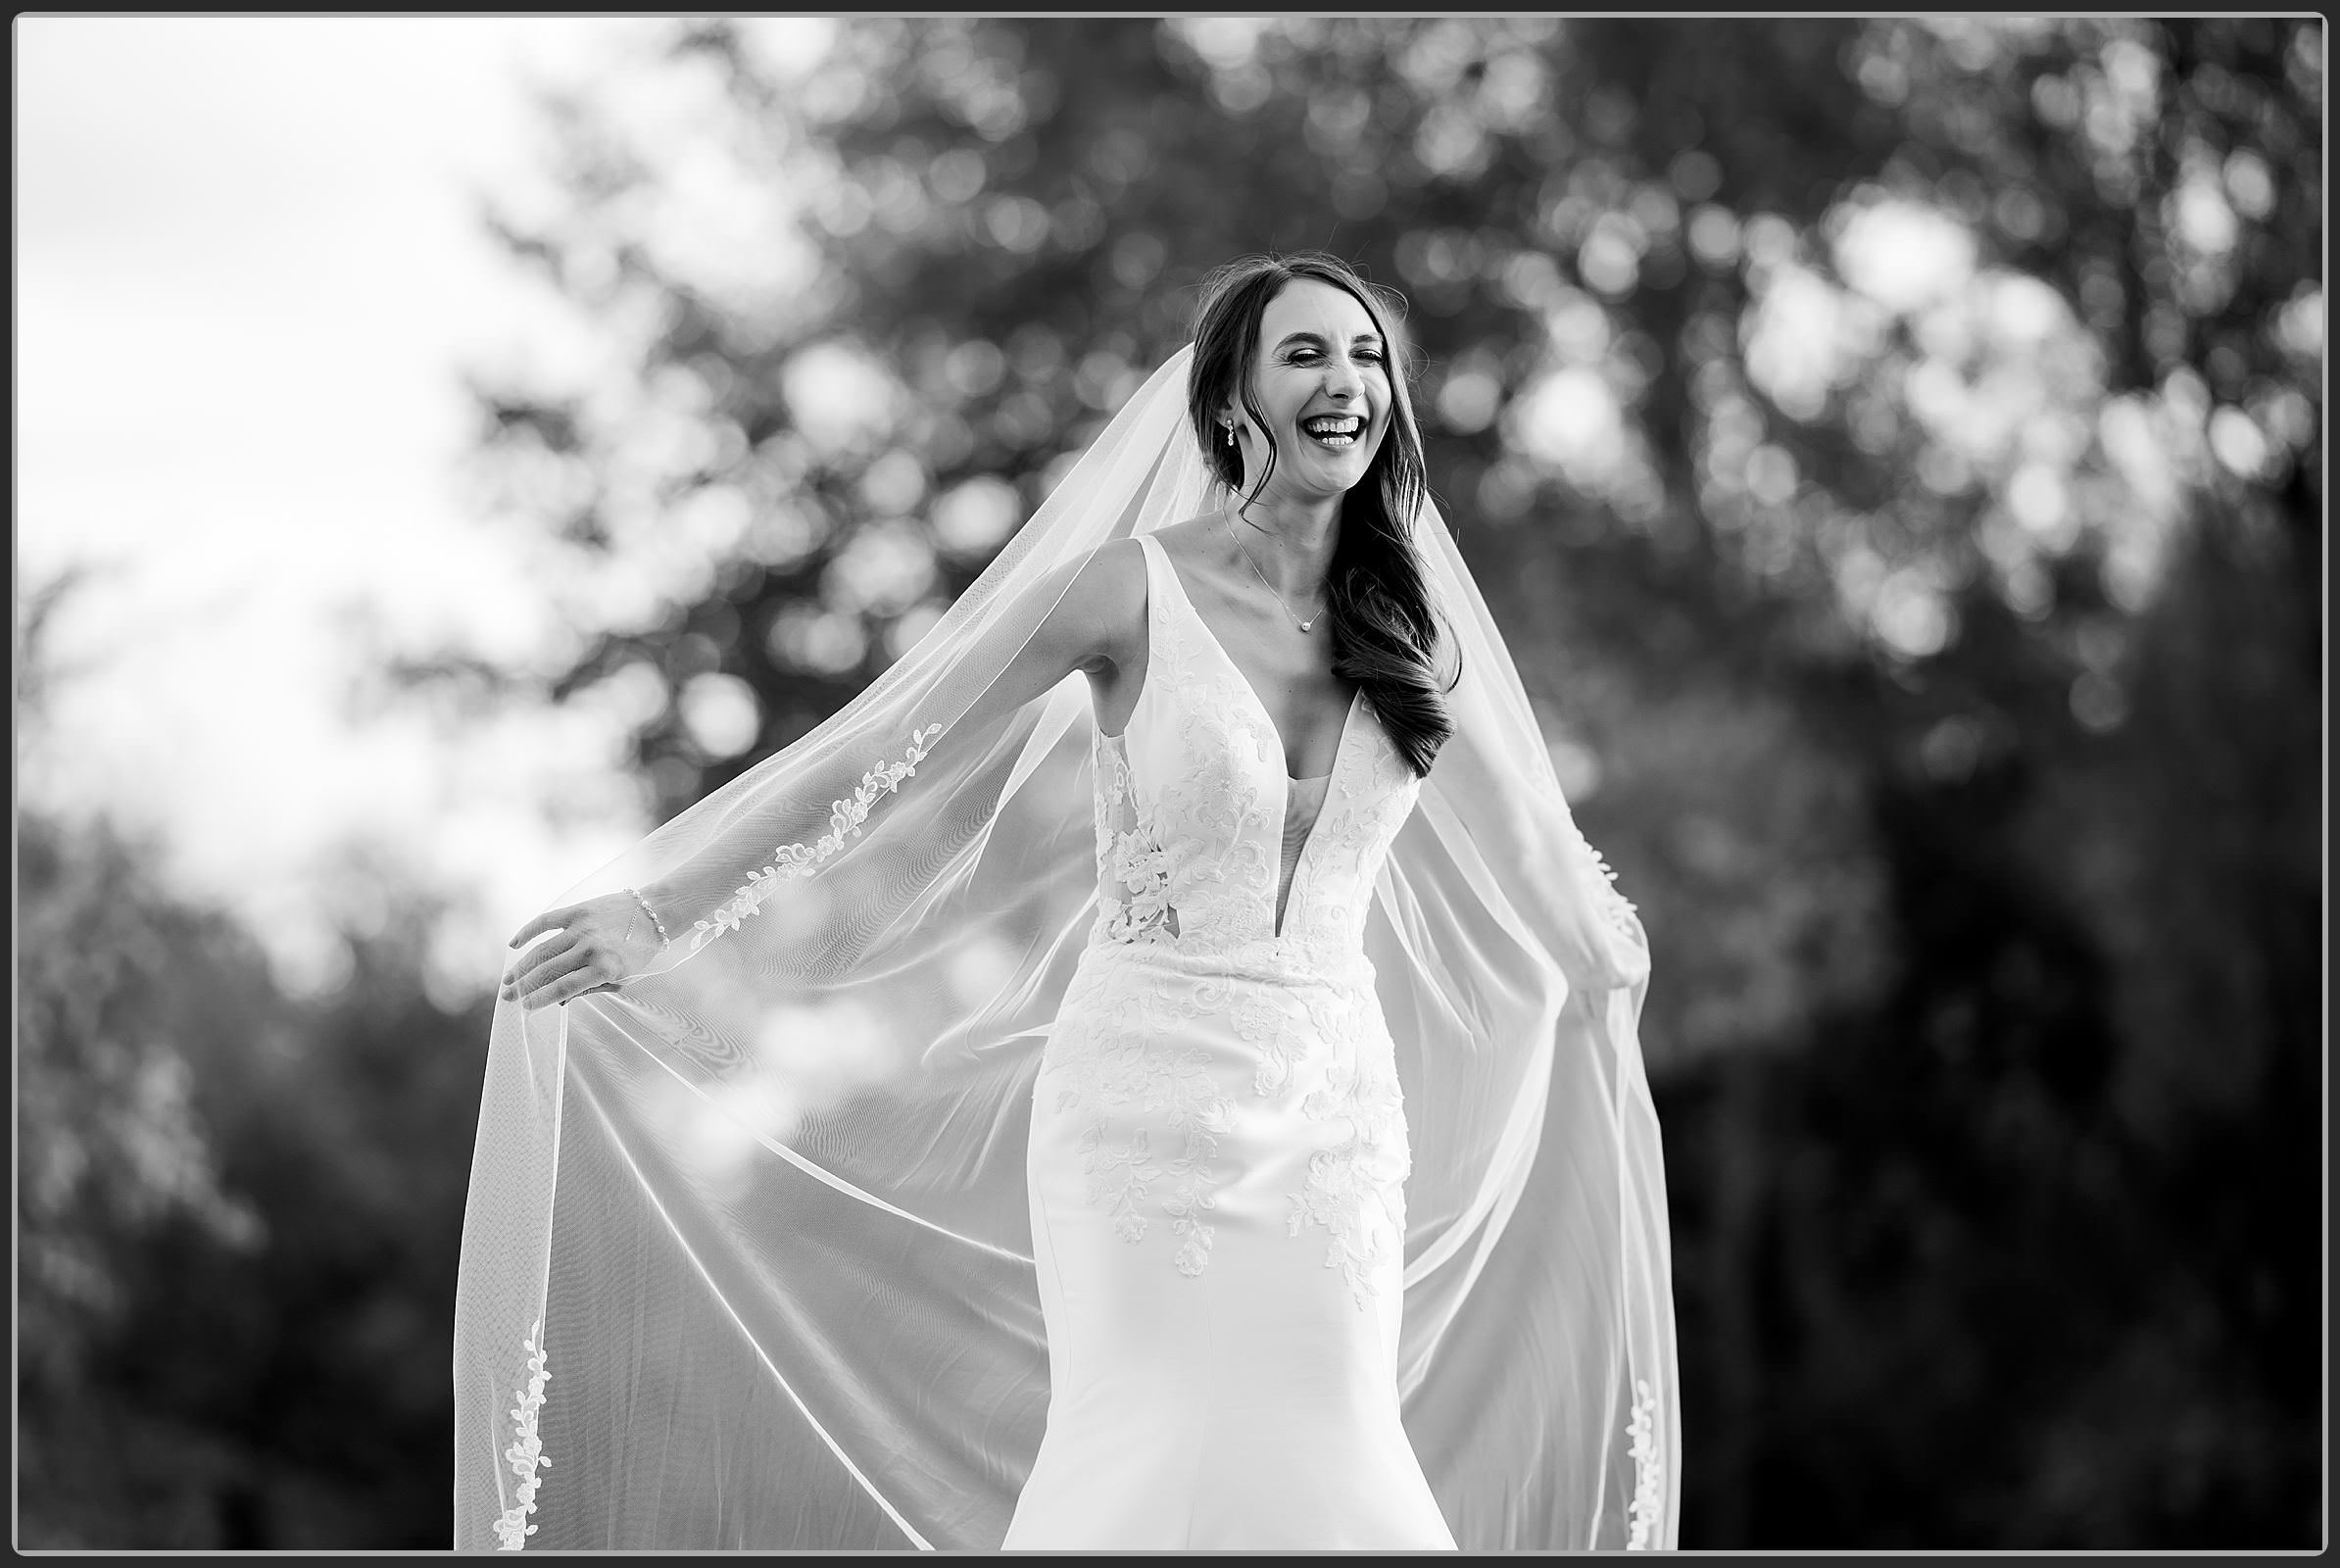 The bride in black and white at the Darley Abbey Mill